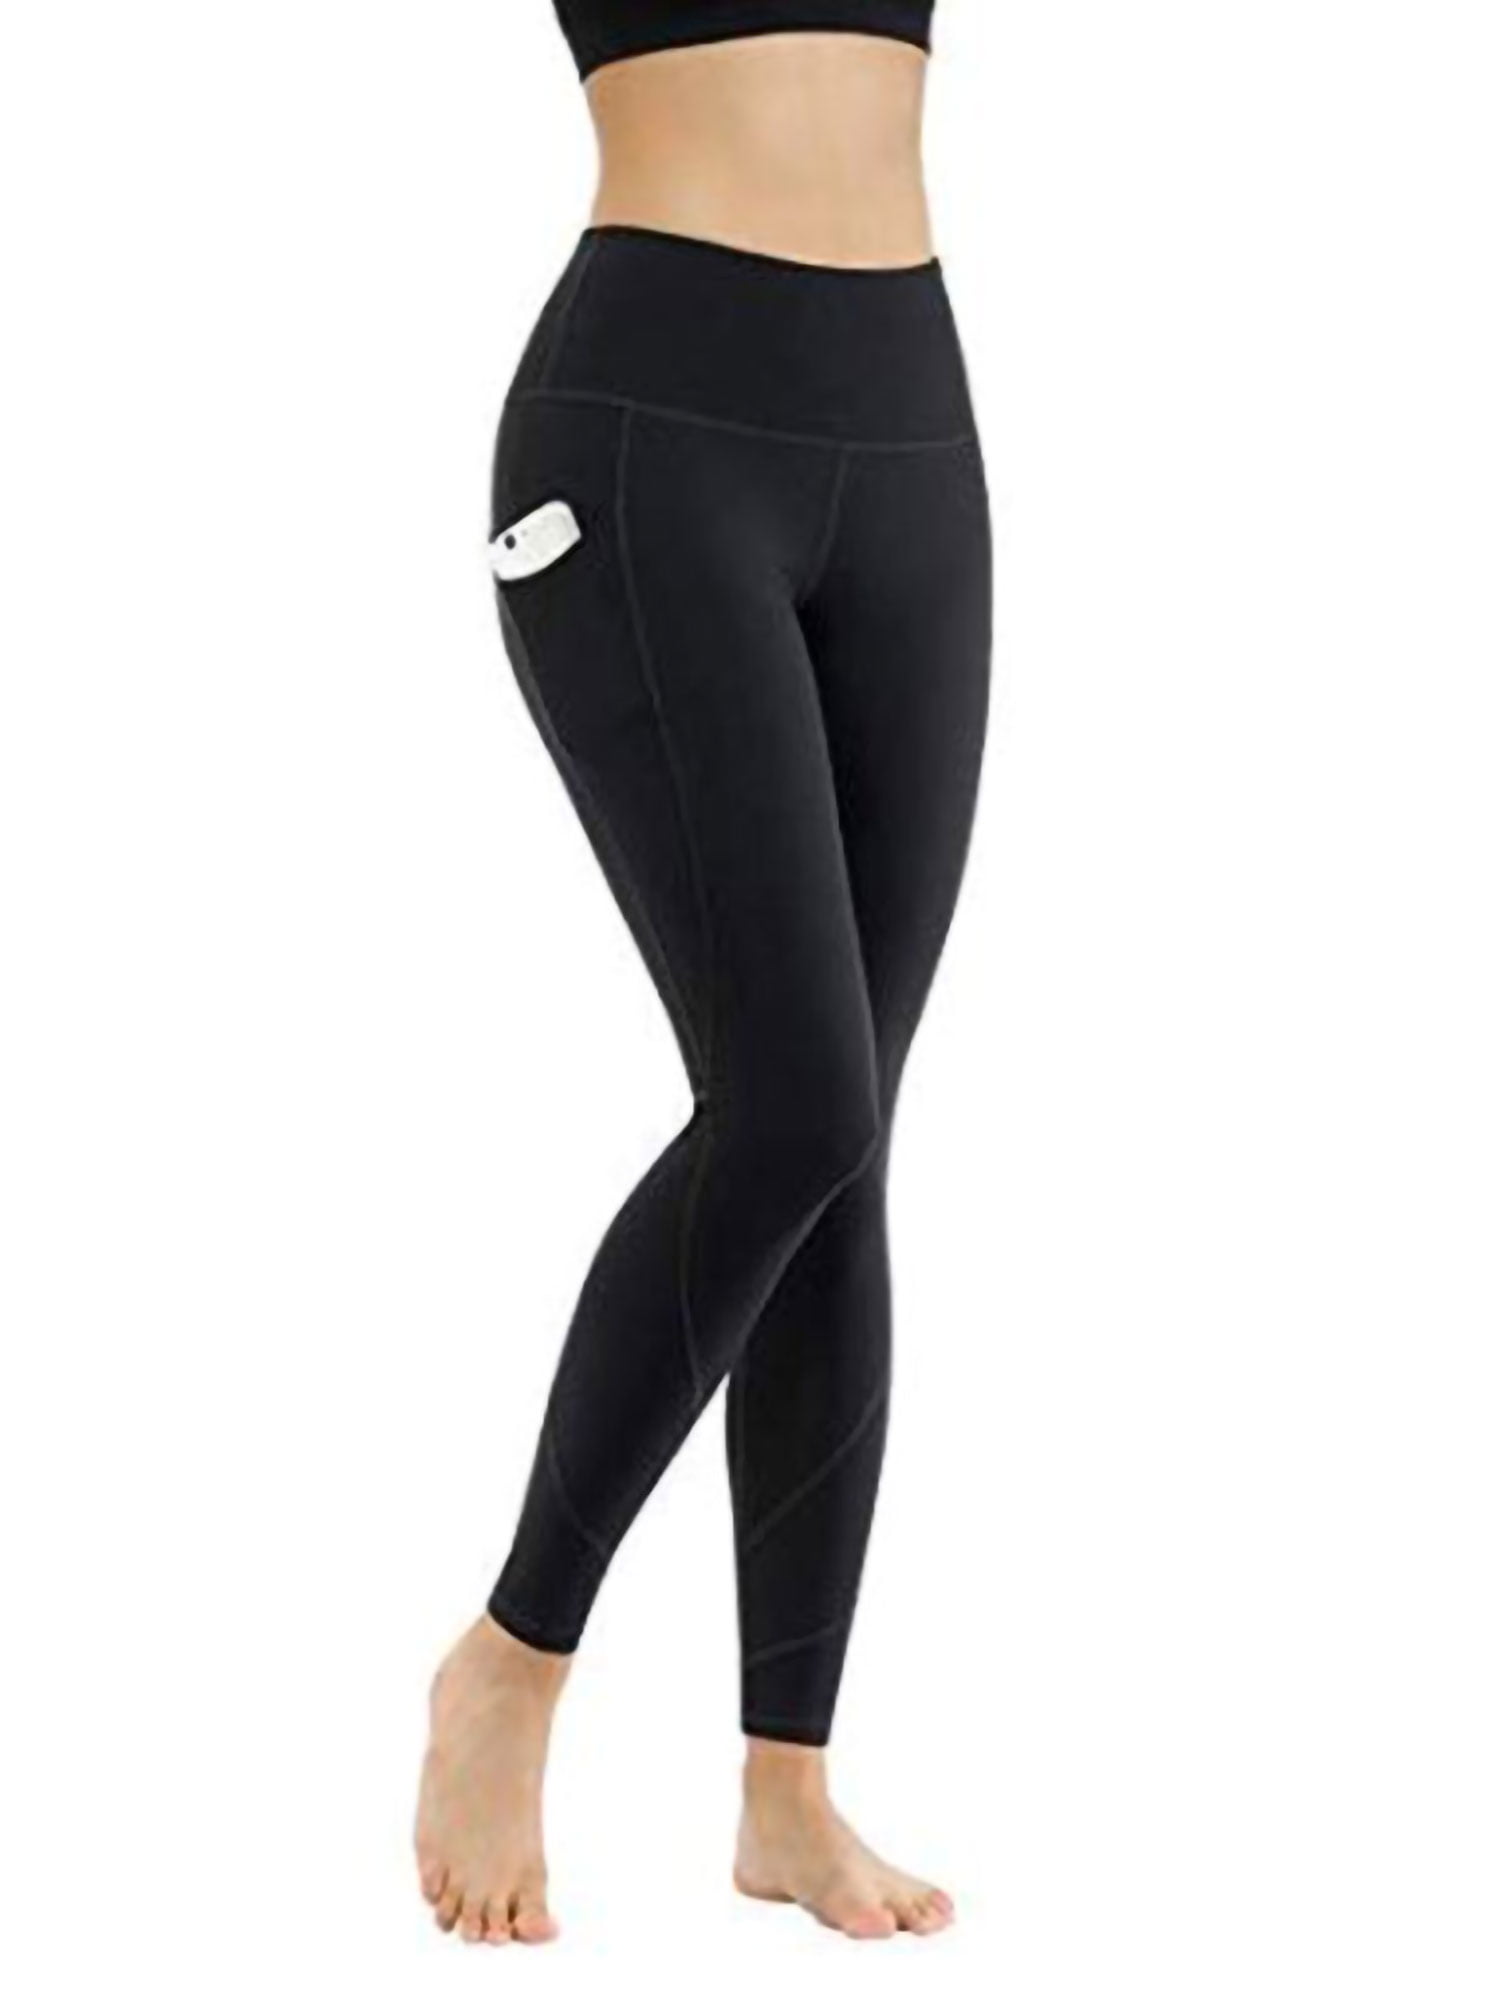 HOSOME Women Solid Sports Tight Pants Workout Leggings Fitness Sports Yoga Pants Yoga Pants